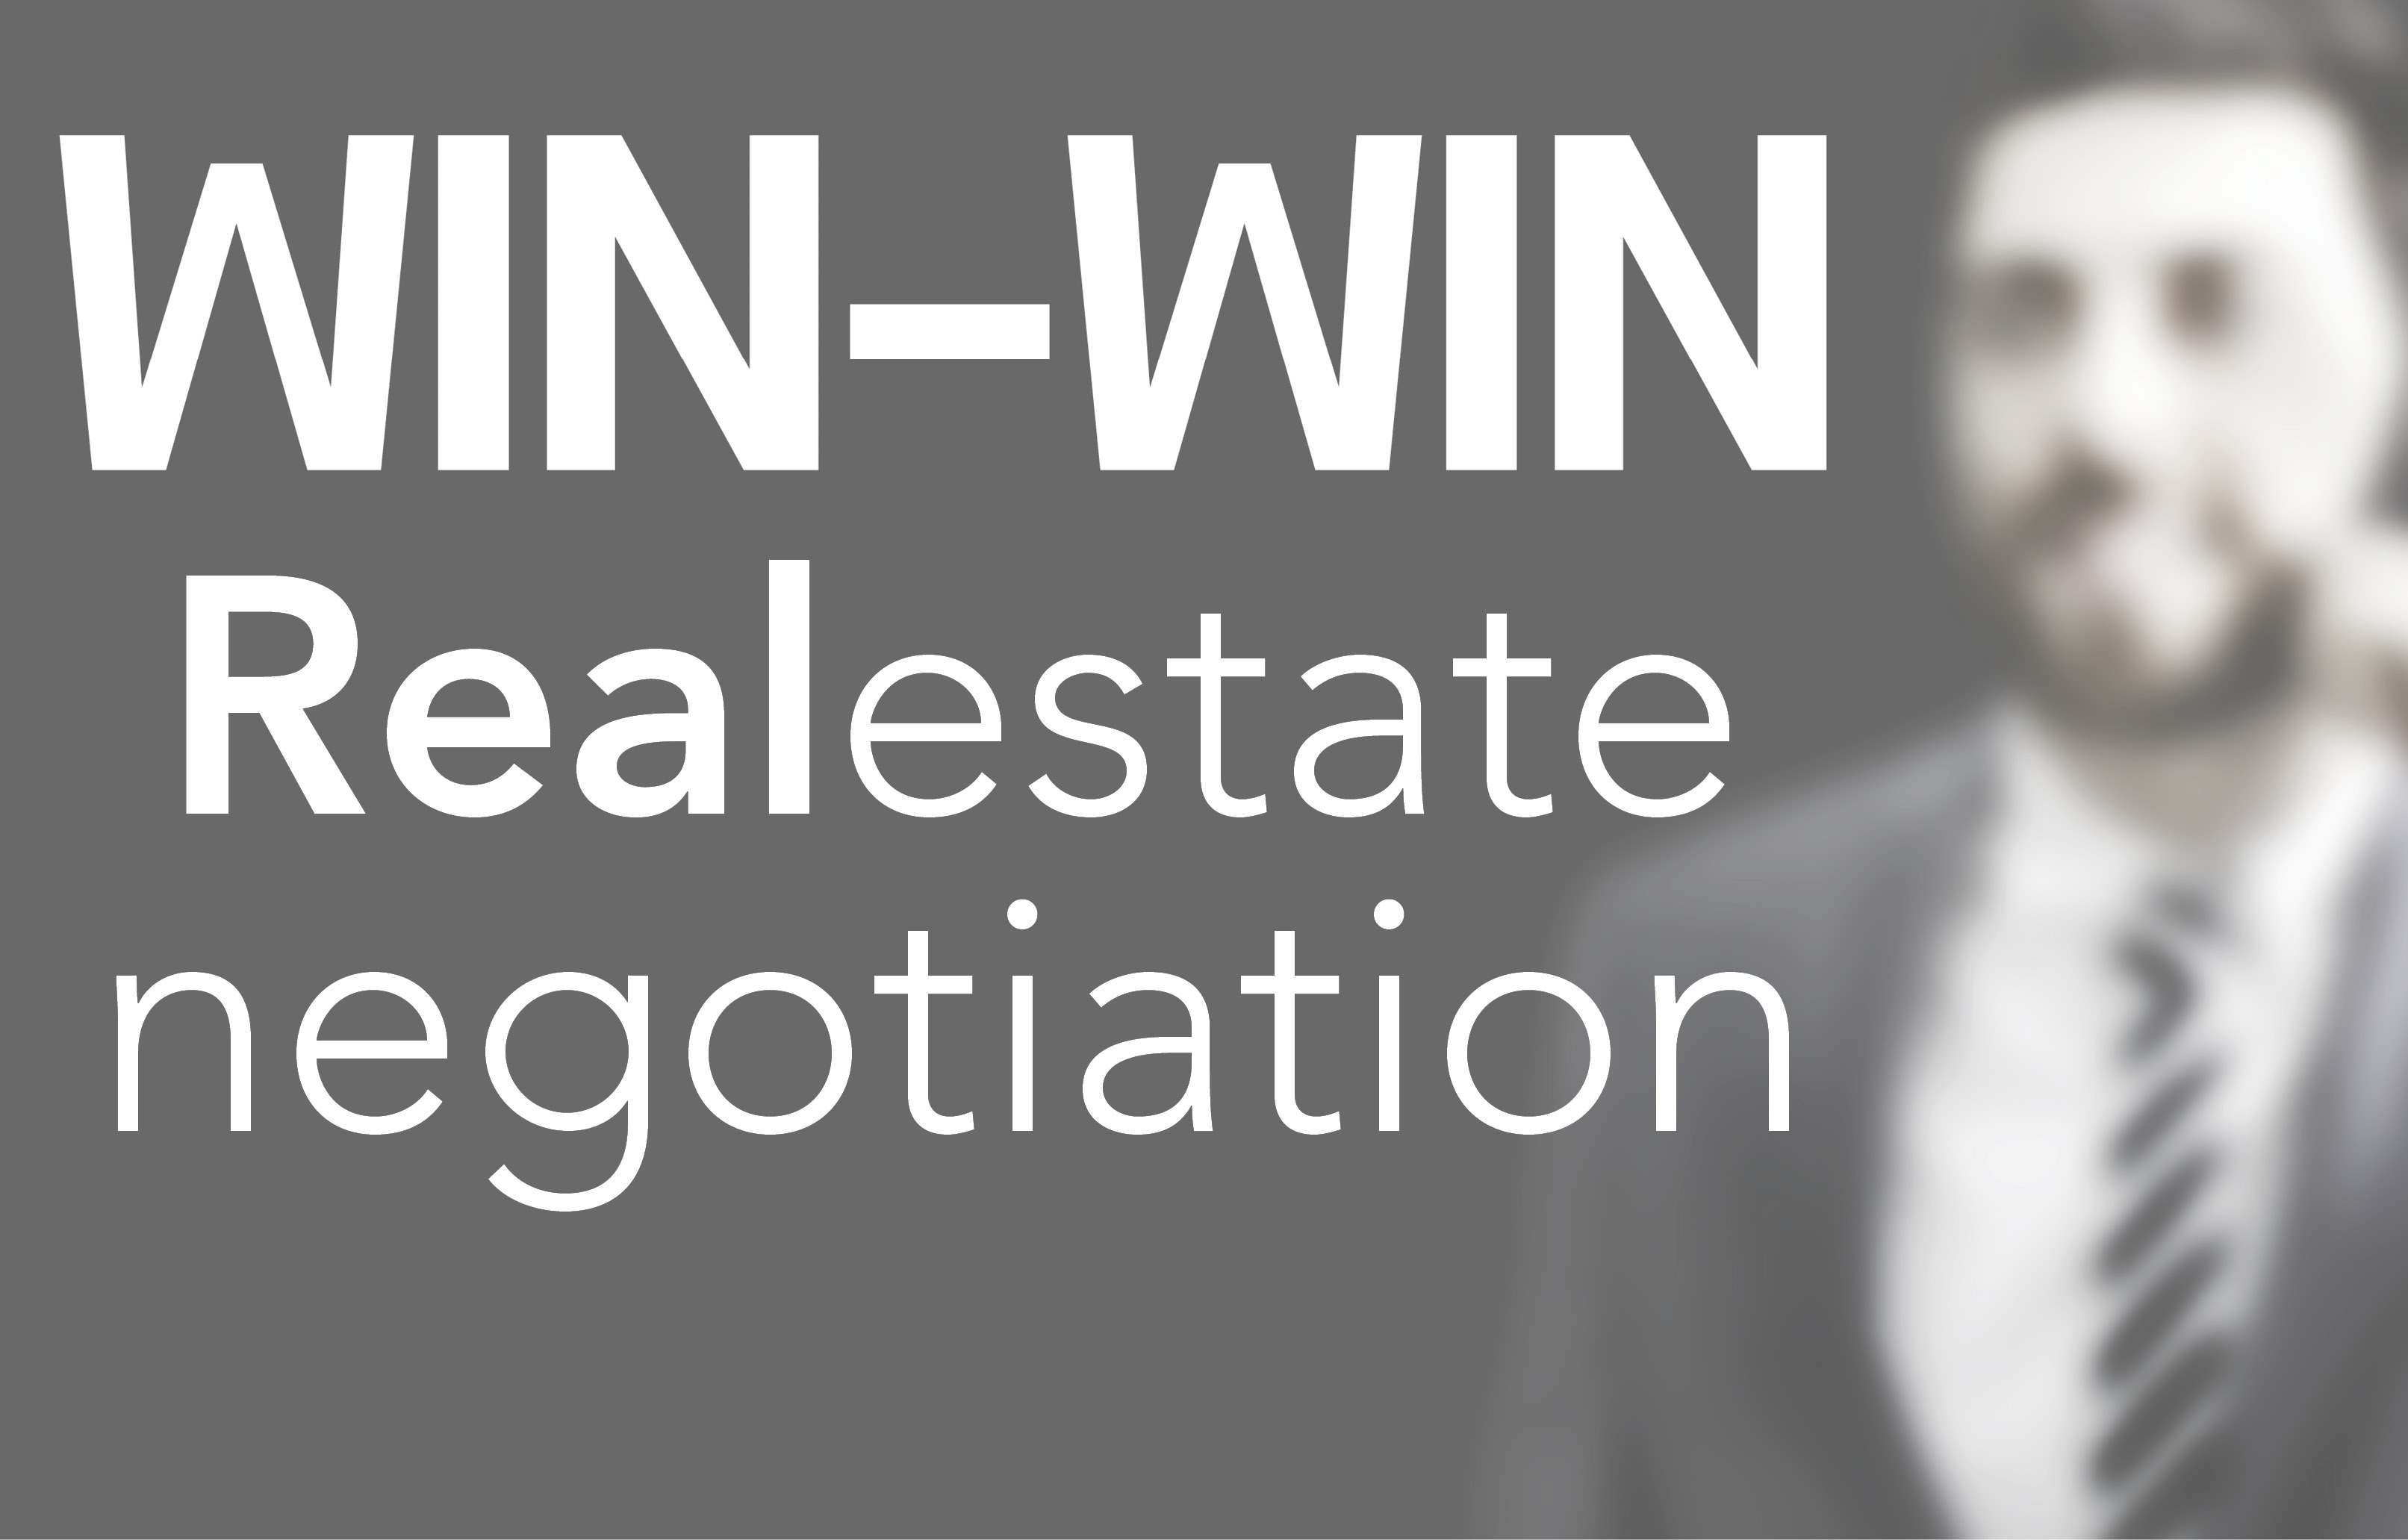 How to be part of a win-win real estate negotiation